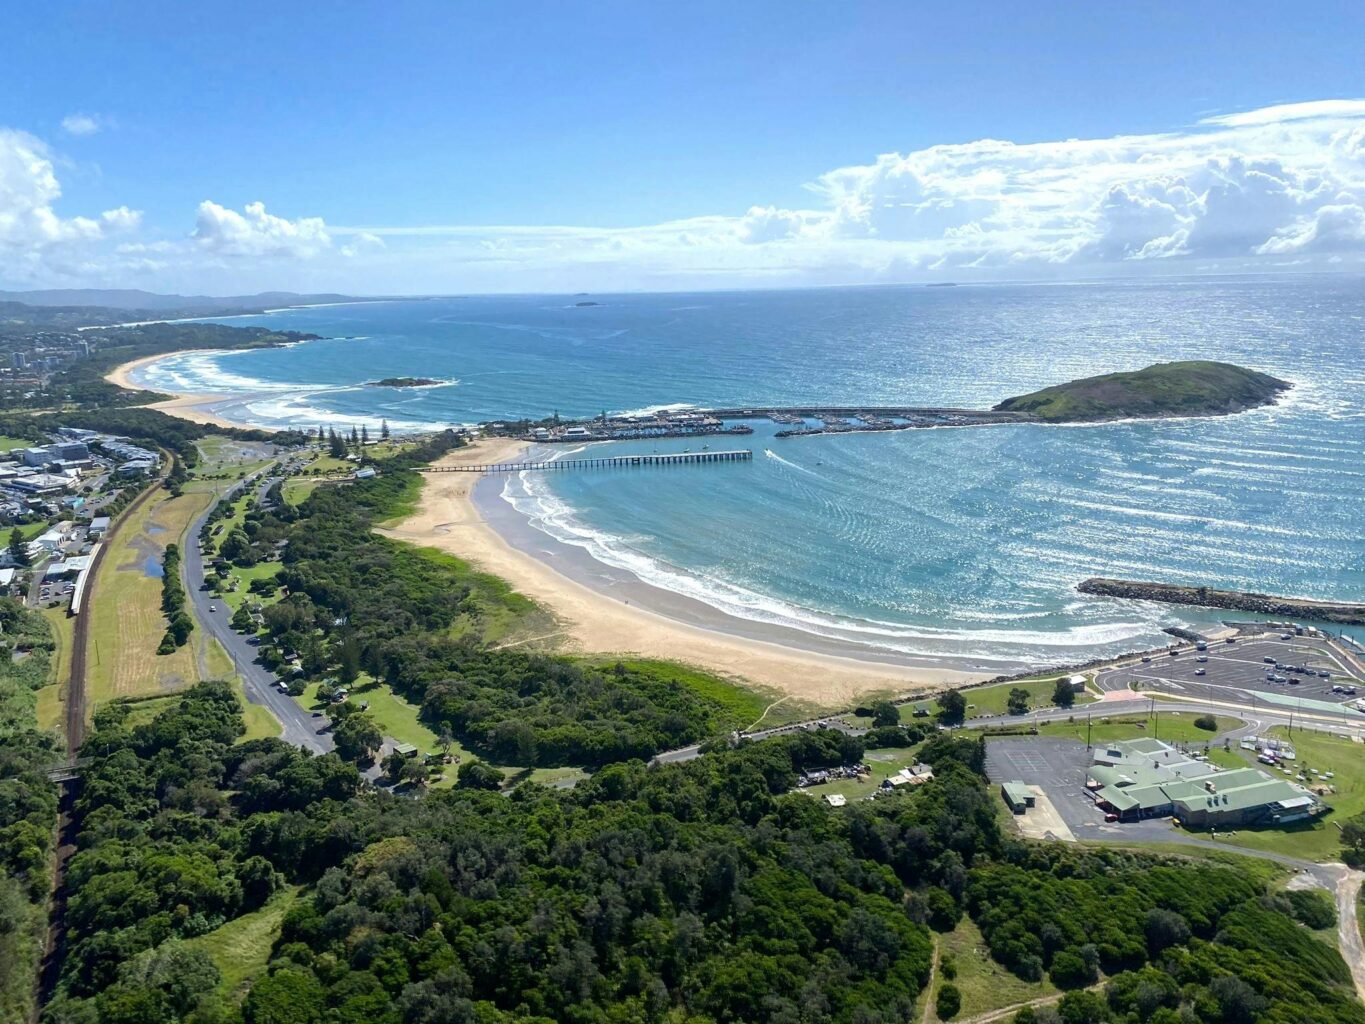 Aerial view of the beautiful Coffs Harbour coastline, Harbour, Jetty & Muttonbird island.